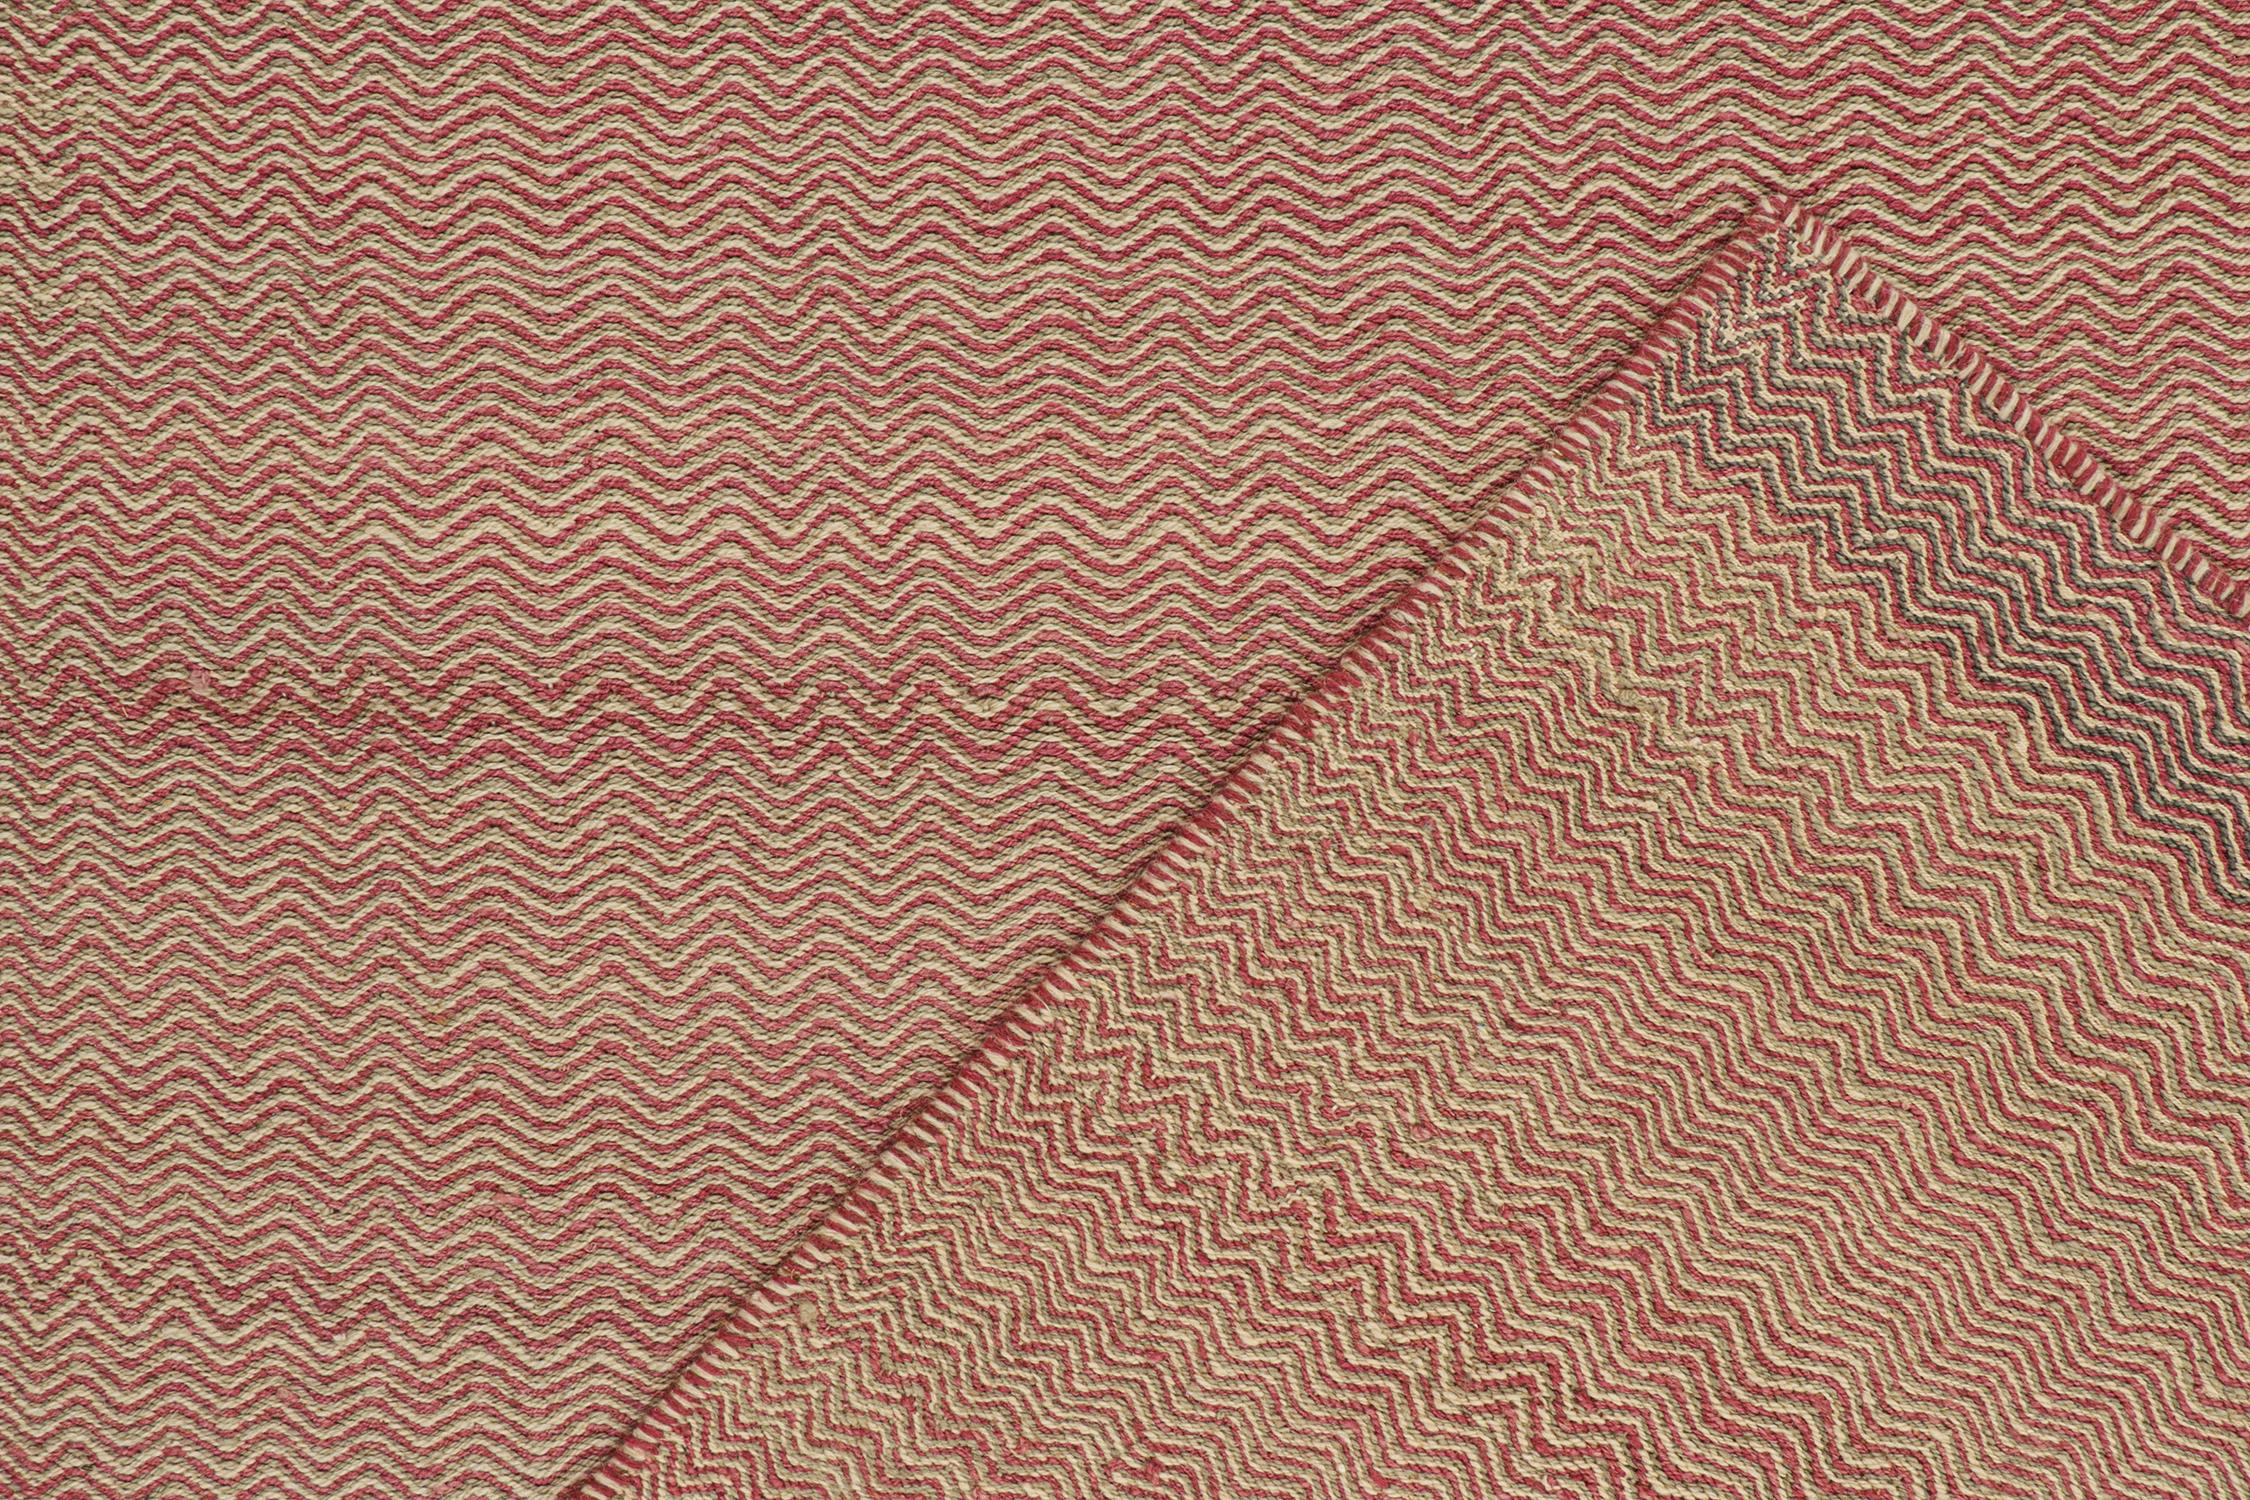 Rug & Kilim’s Contemporary Kilim Rug in Pink and Beige Chevrons In New Condition For Sale In Long Island City, NY